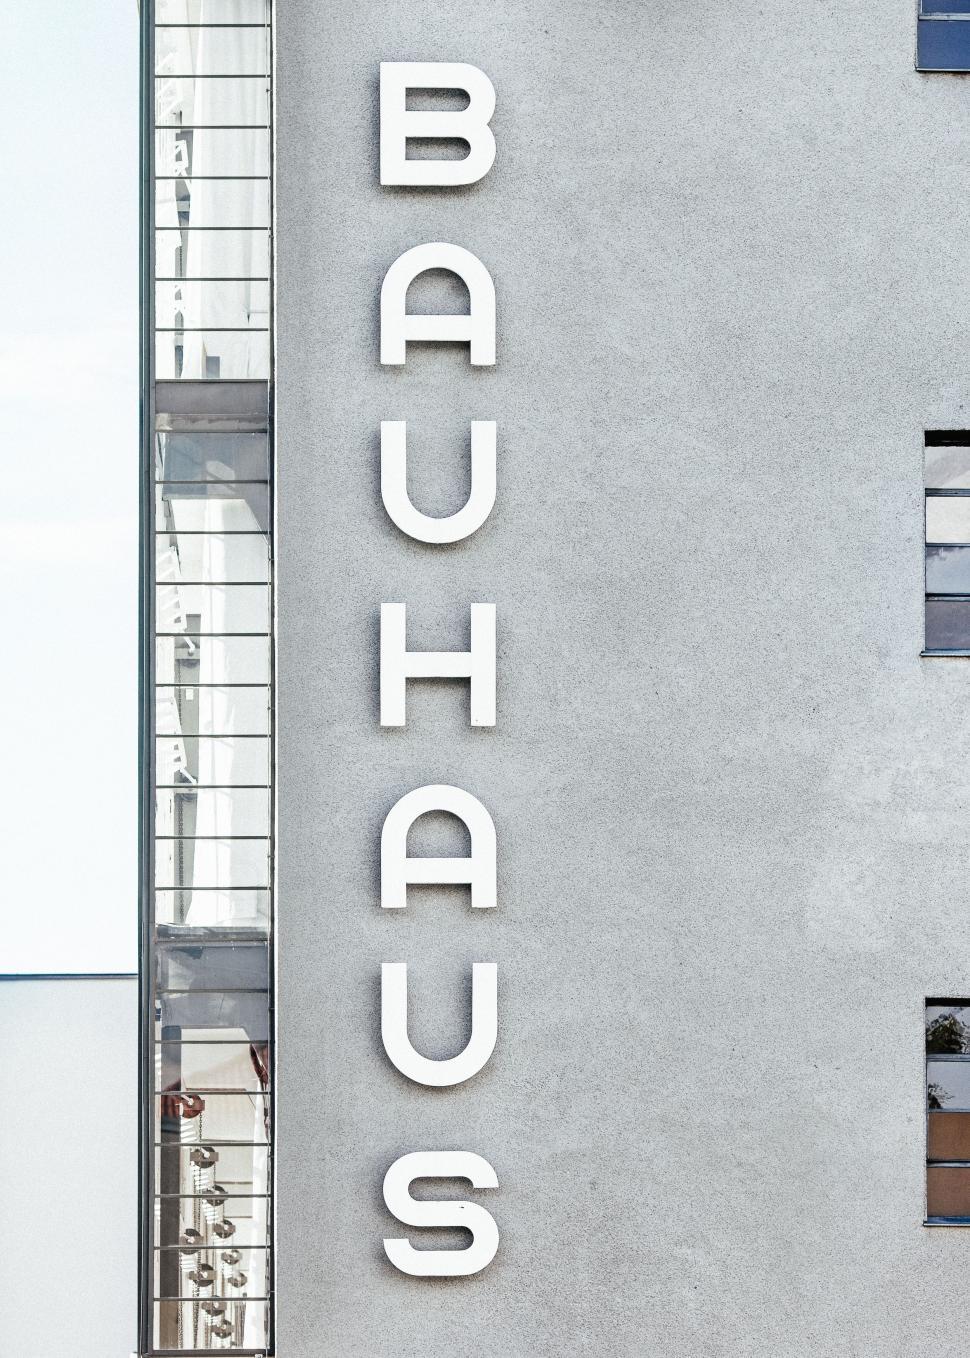 Free Image of Tall Building With Sign 